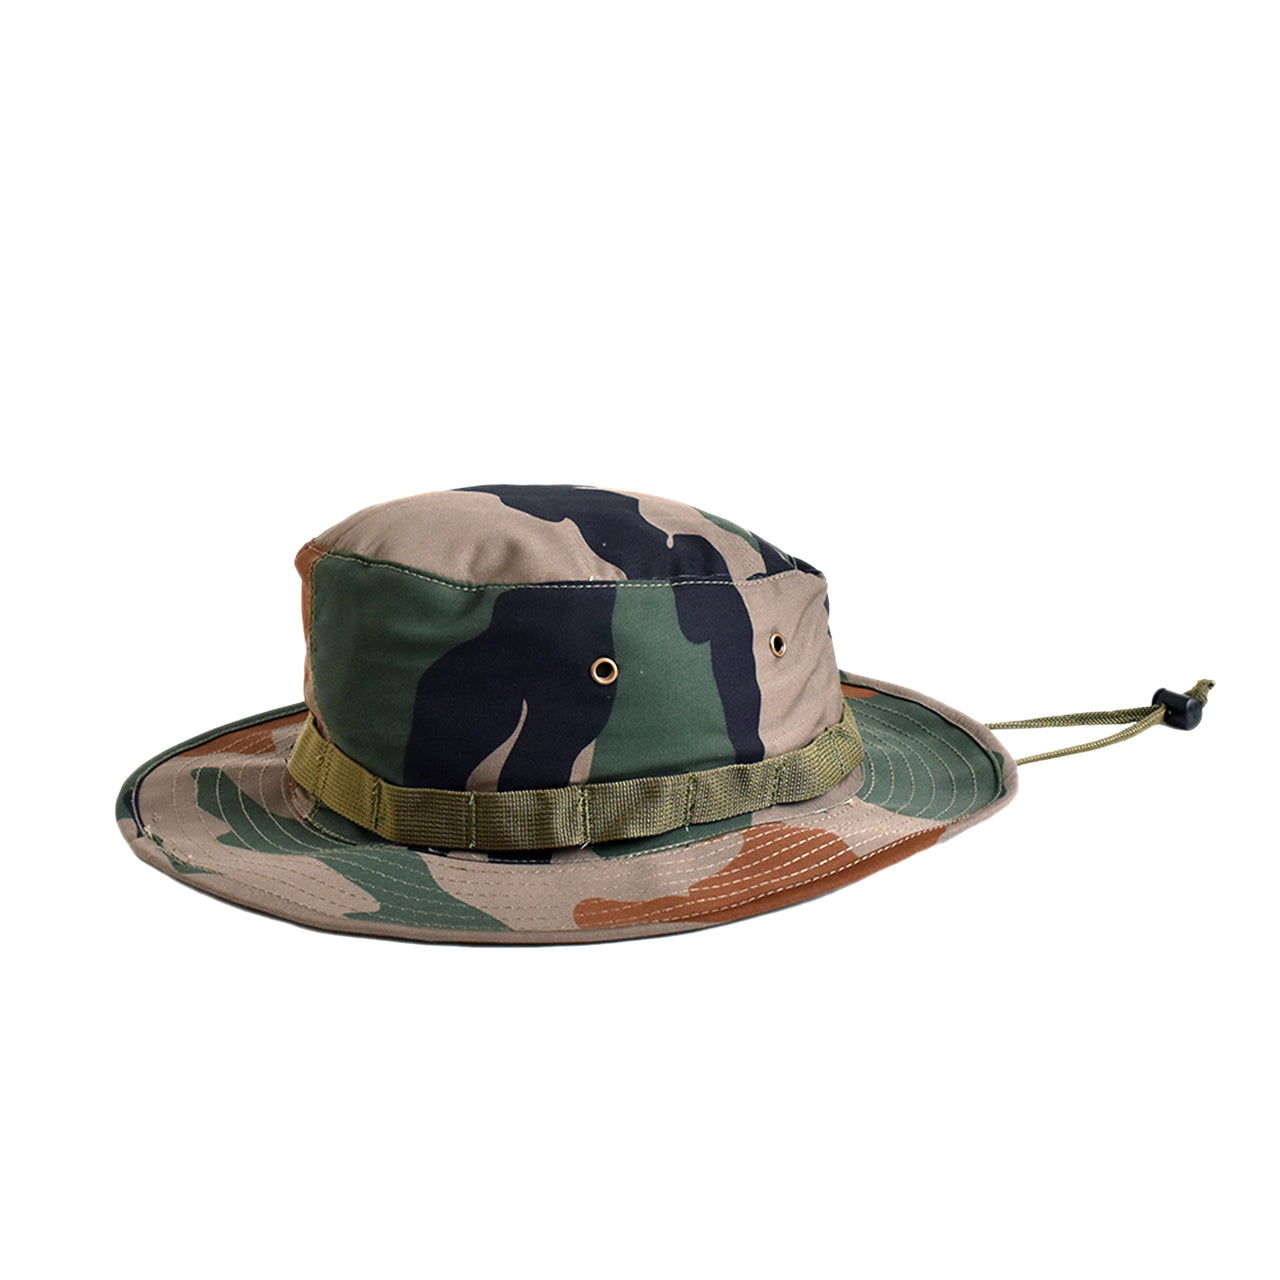 Military Boonie Hat - Indian Army Camo